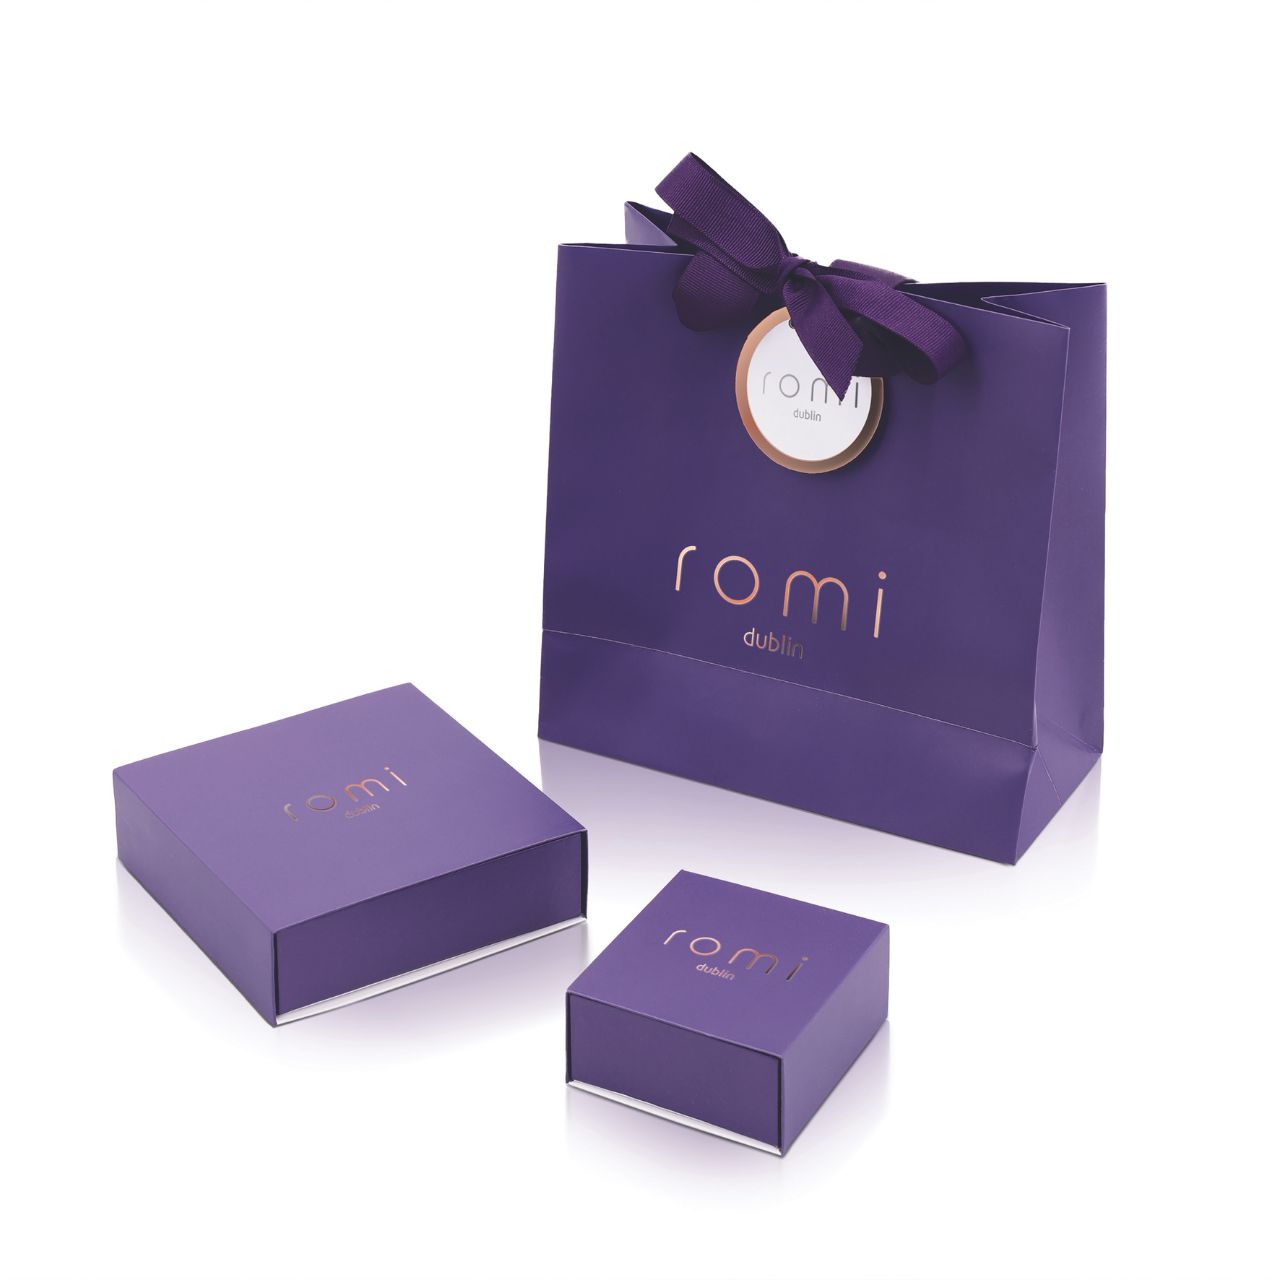 Romi Dublin Herringbone Chain Necklace Silver  This easy-to-wear jewellery collection was inspired by daughter Romi who loves to style and accessorise. An outfit isn’t complete until the perfect pieces of jewellery and accessories have been selected to enhance it.